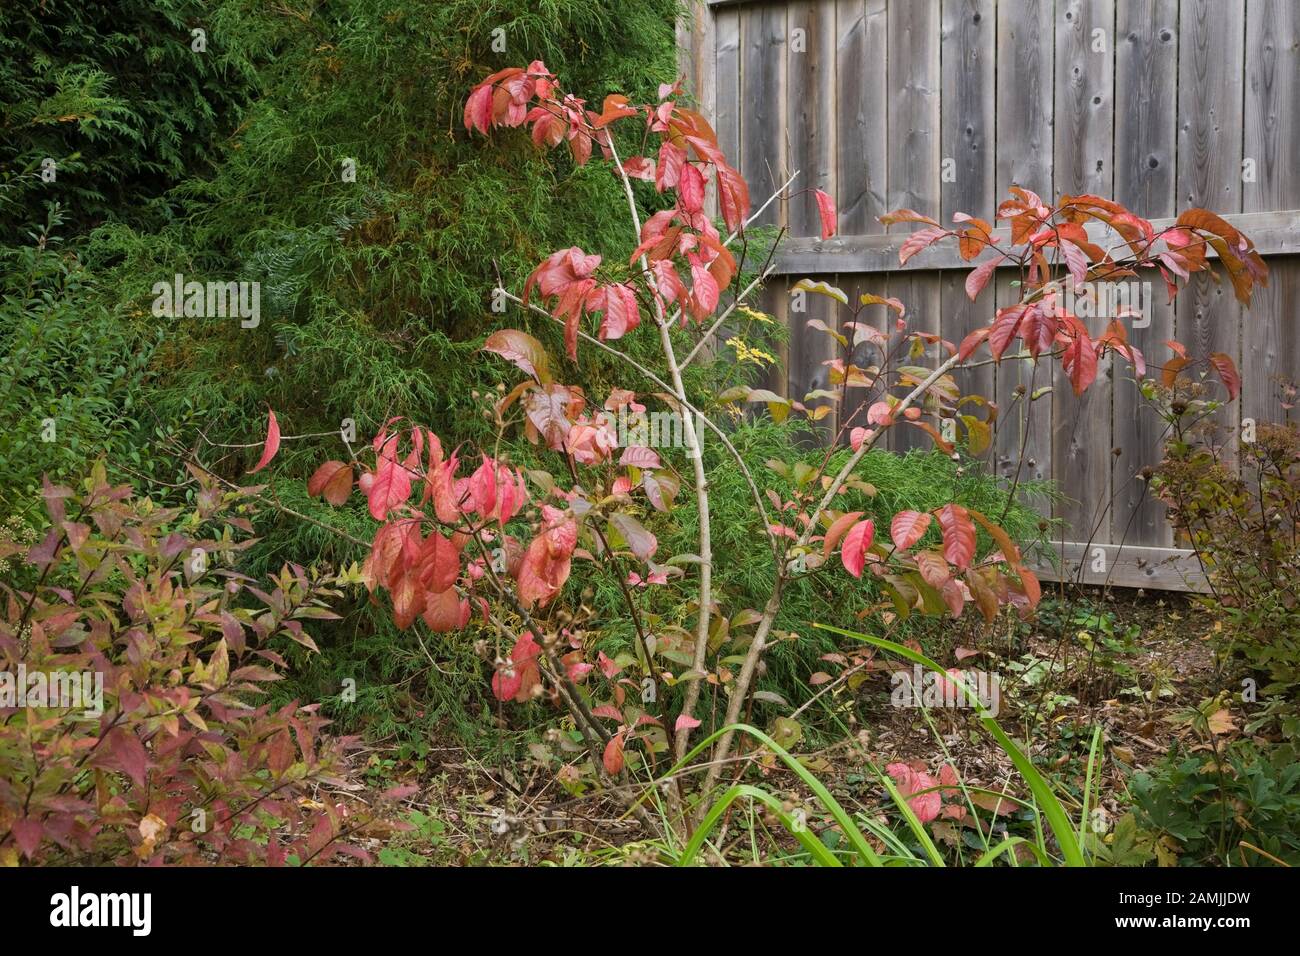 Border with grey wooden fence, Thuja - Cedar tree and Euonymus alatus - Spindle Tree with red leaves in mulch border in backyard garden in autumn. Stock Photo